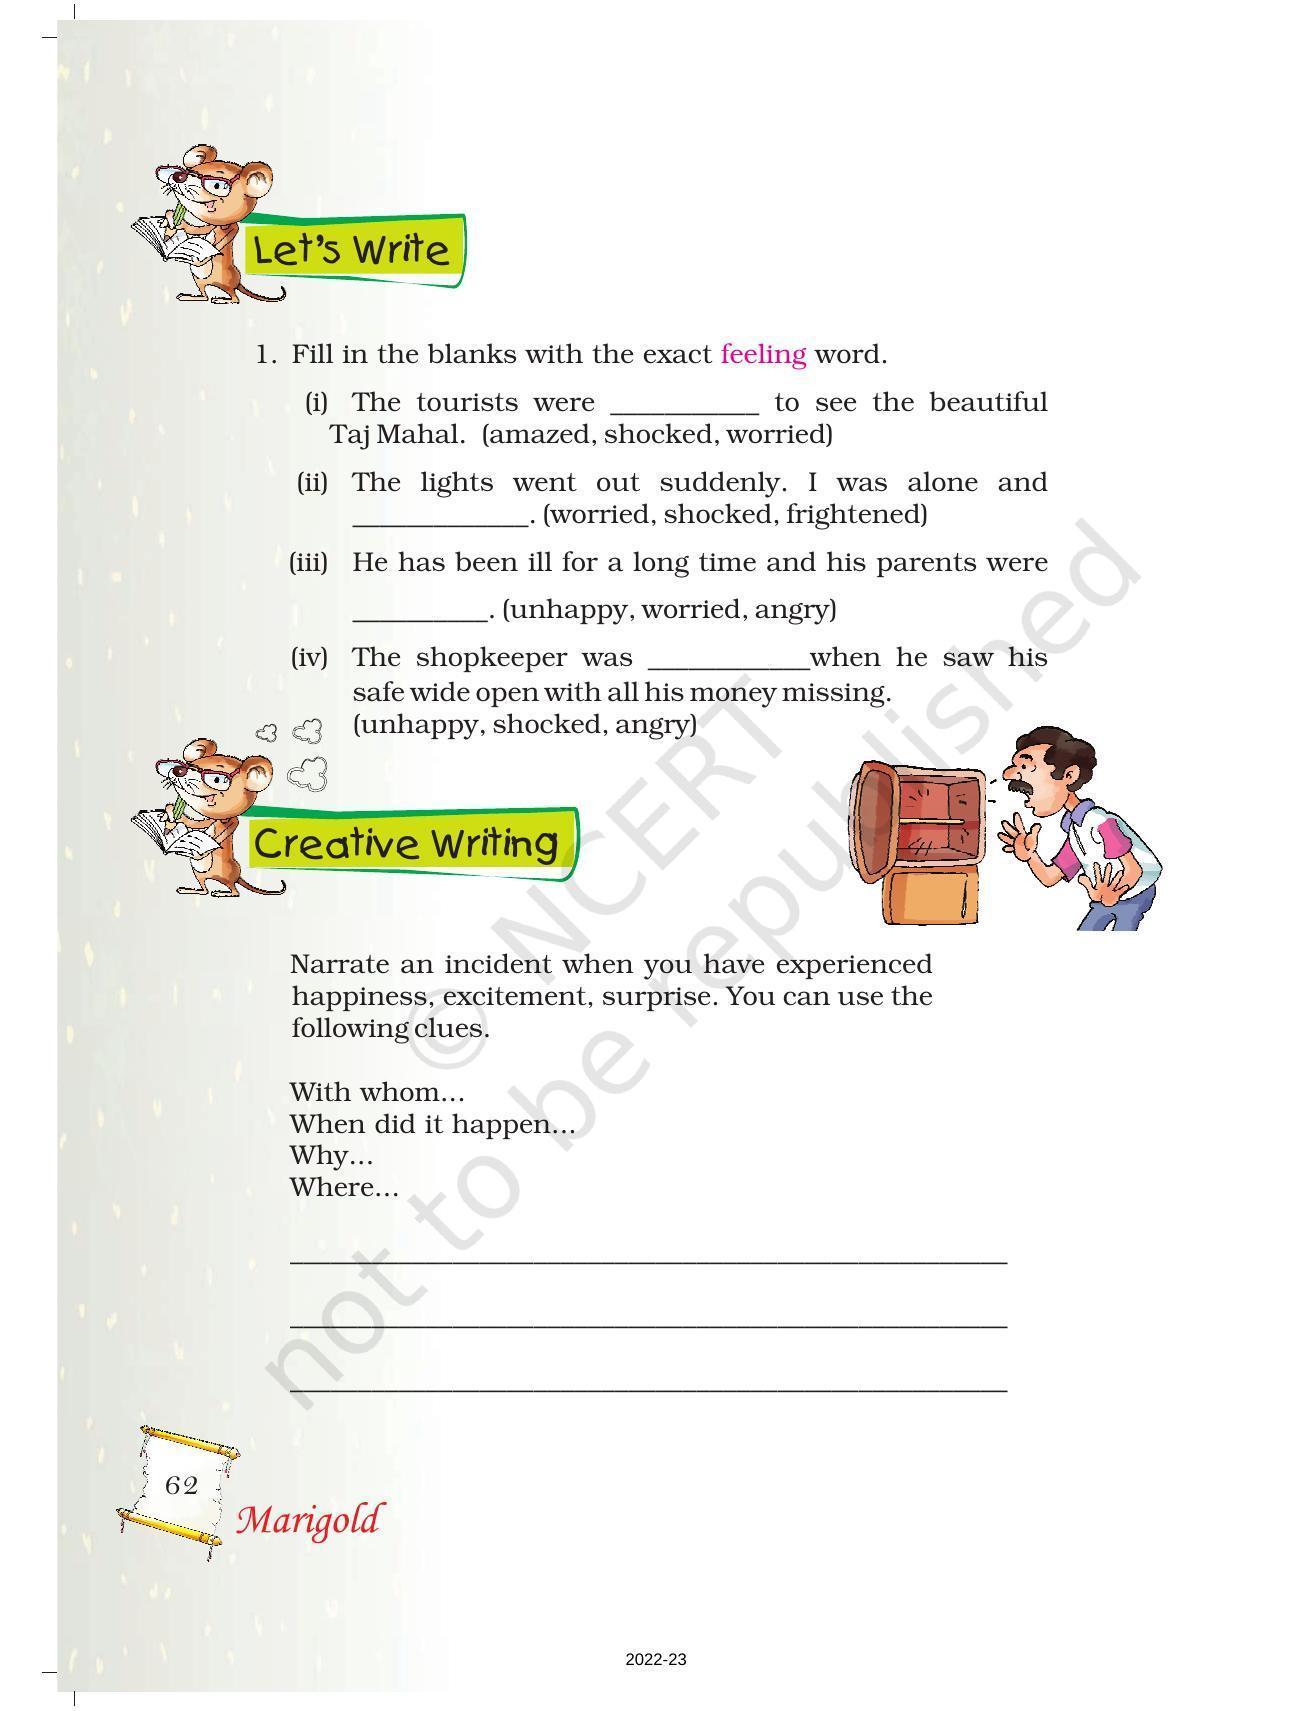 NCERT Book for Class 5 English Chapter 4 Crying - Page 5